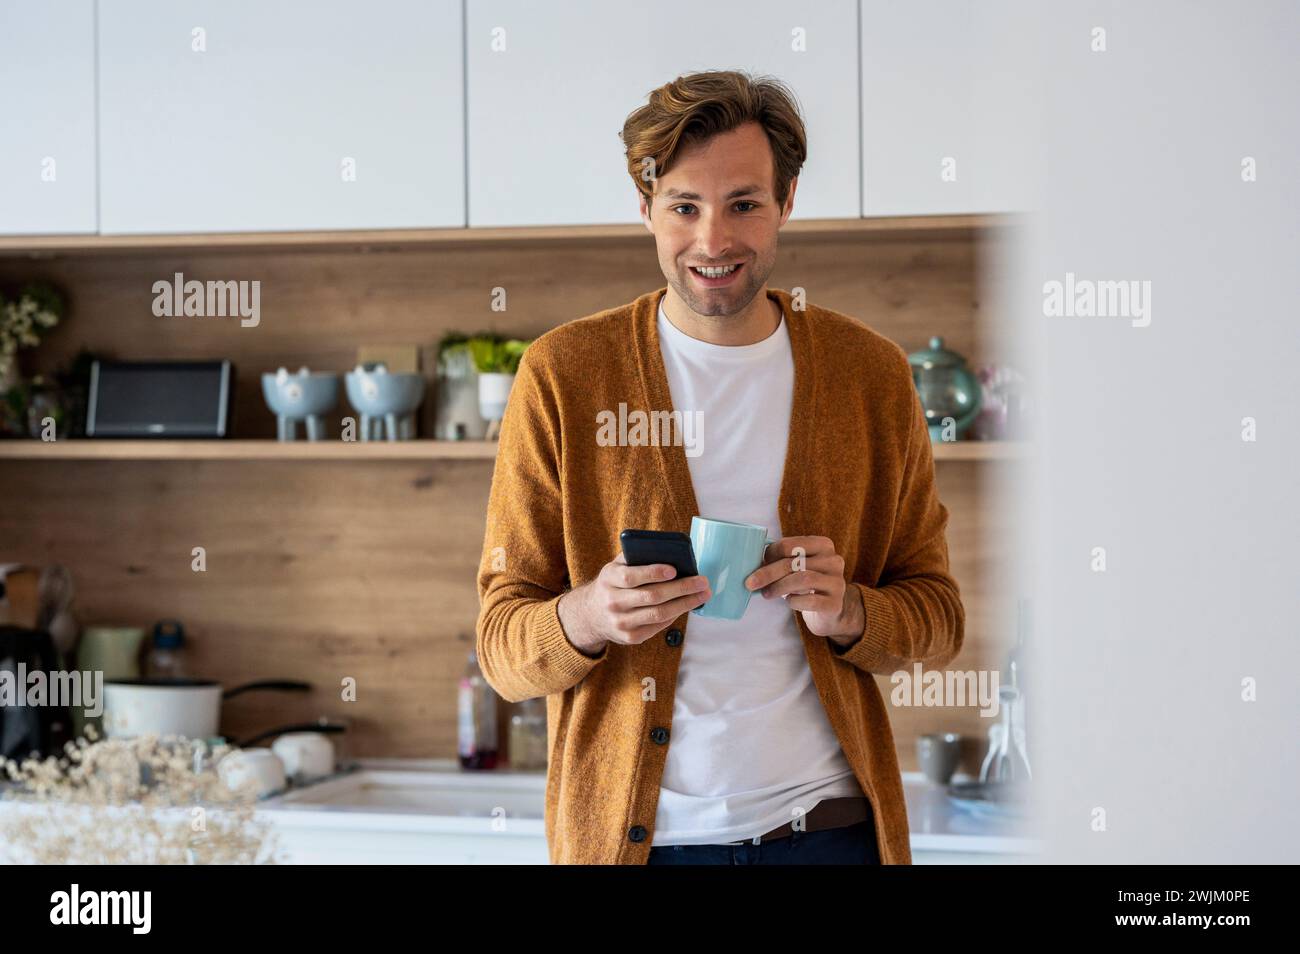 Adult man looking at the camera while using smart phone Stock Photo